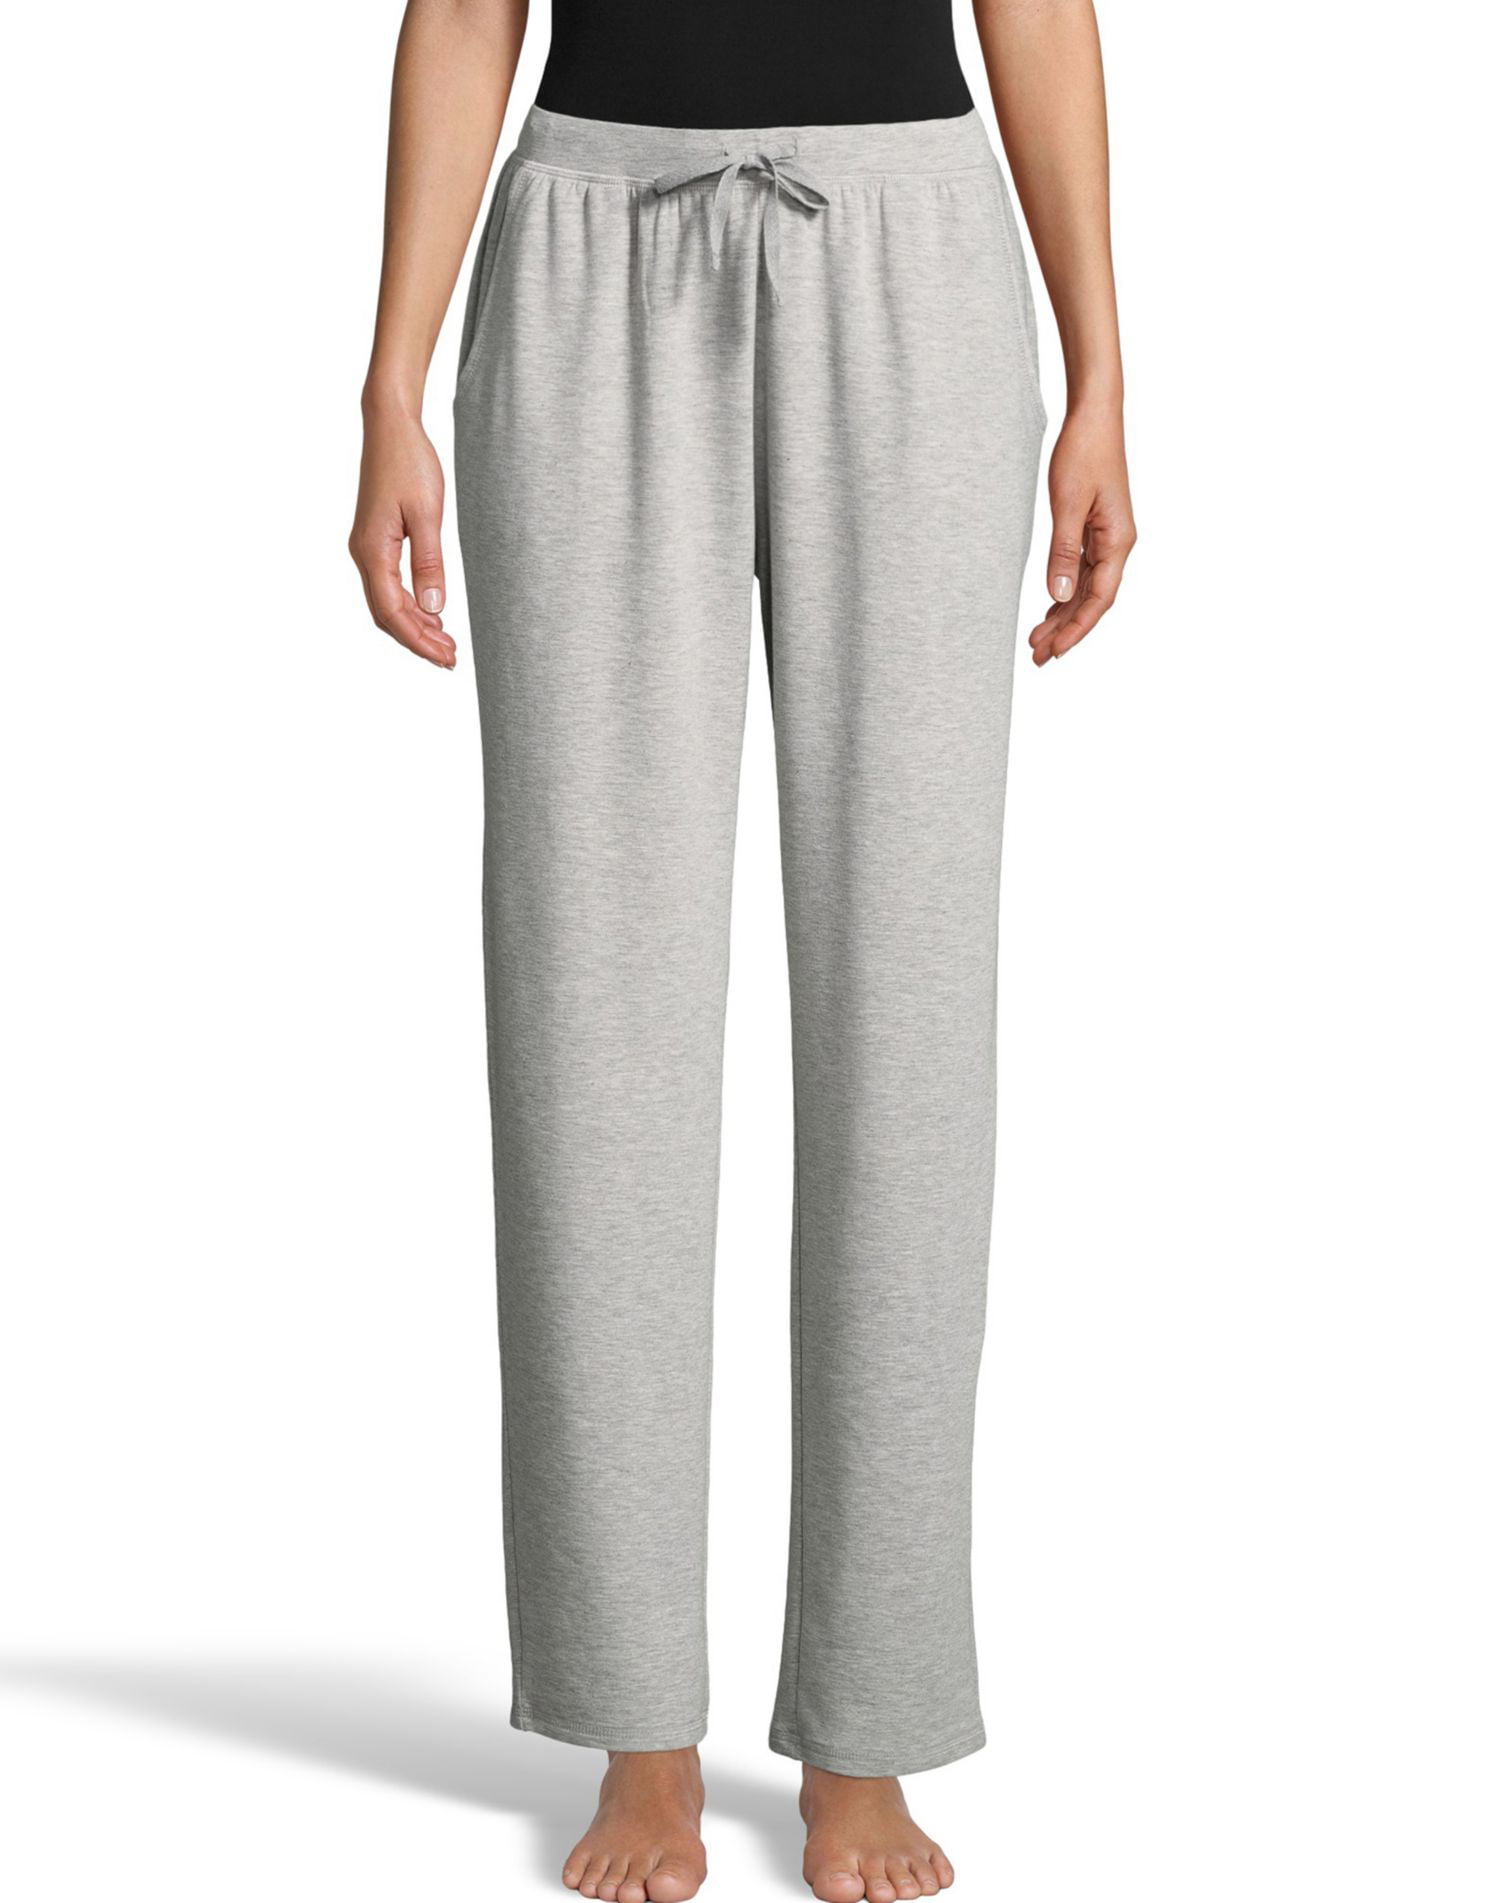 Women's Plus Heathered French Terry Lounge Pant - Walmart.com